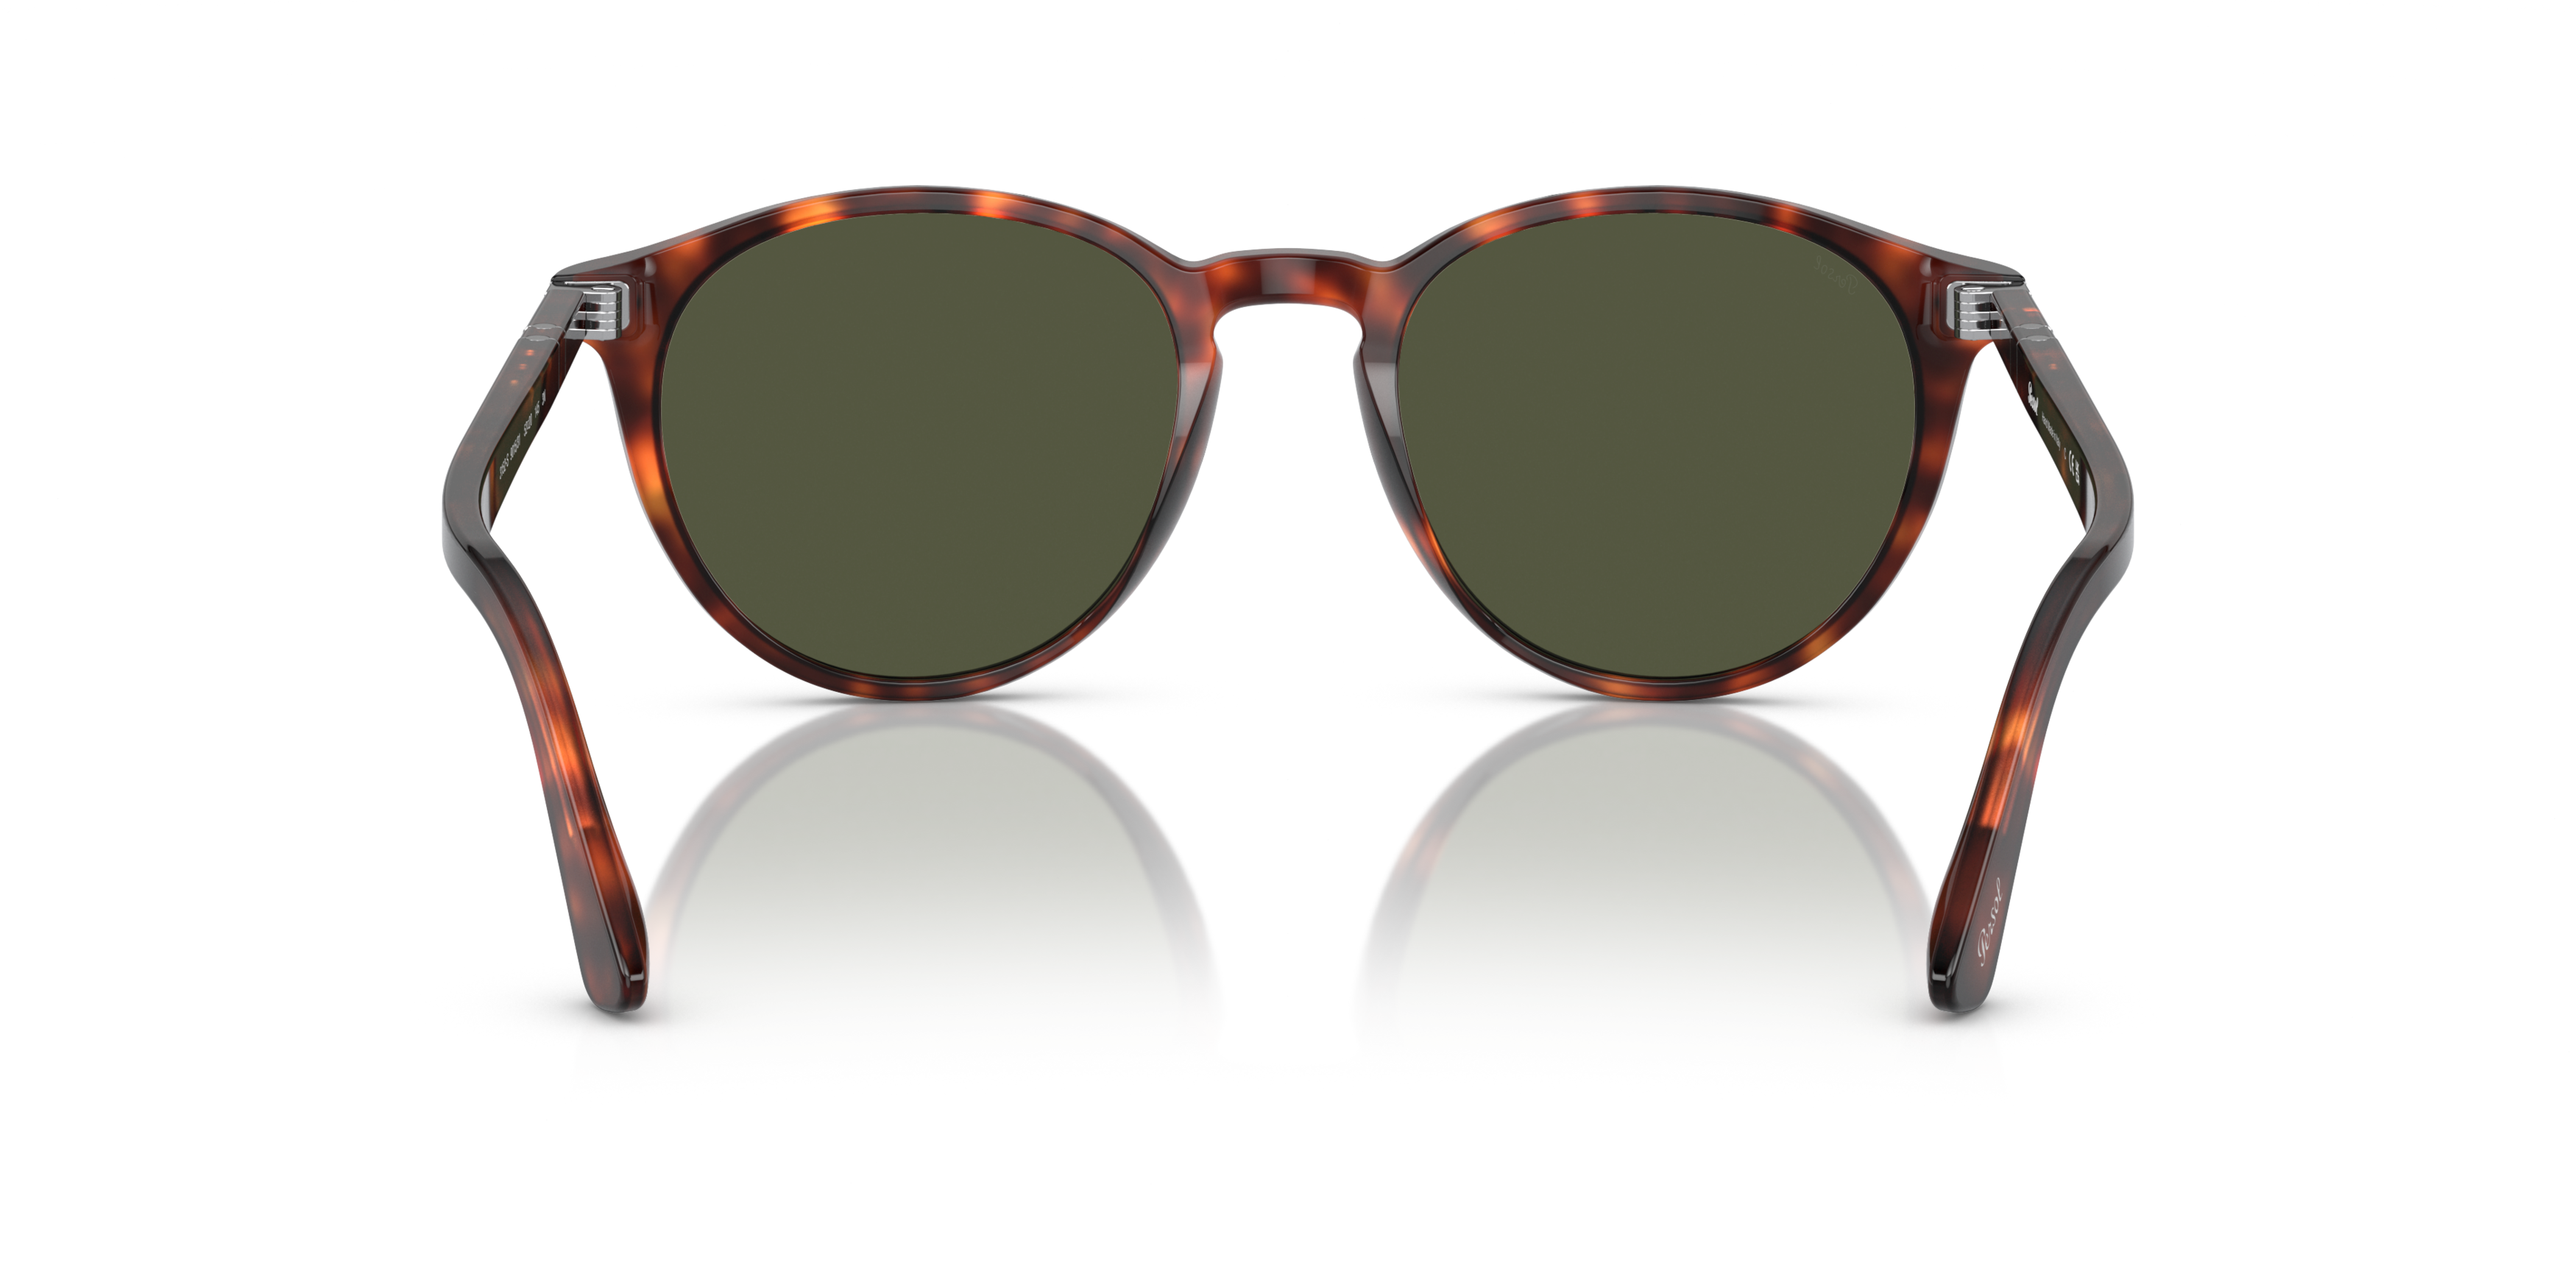 [products.image.detail02] Persol PO3152S 901531